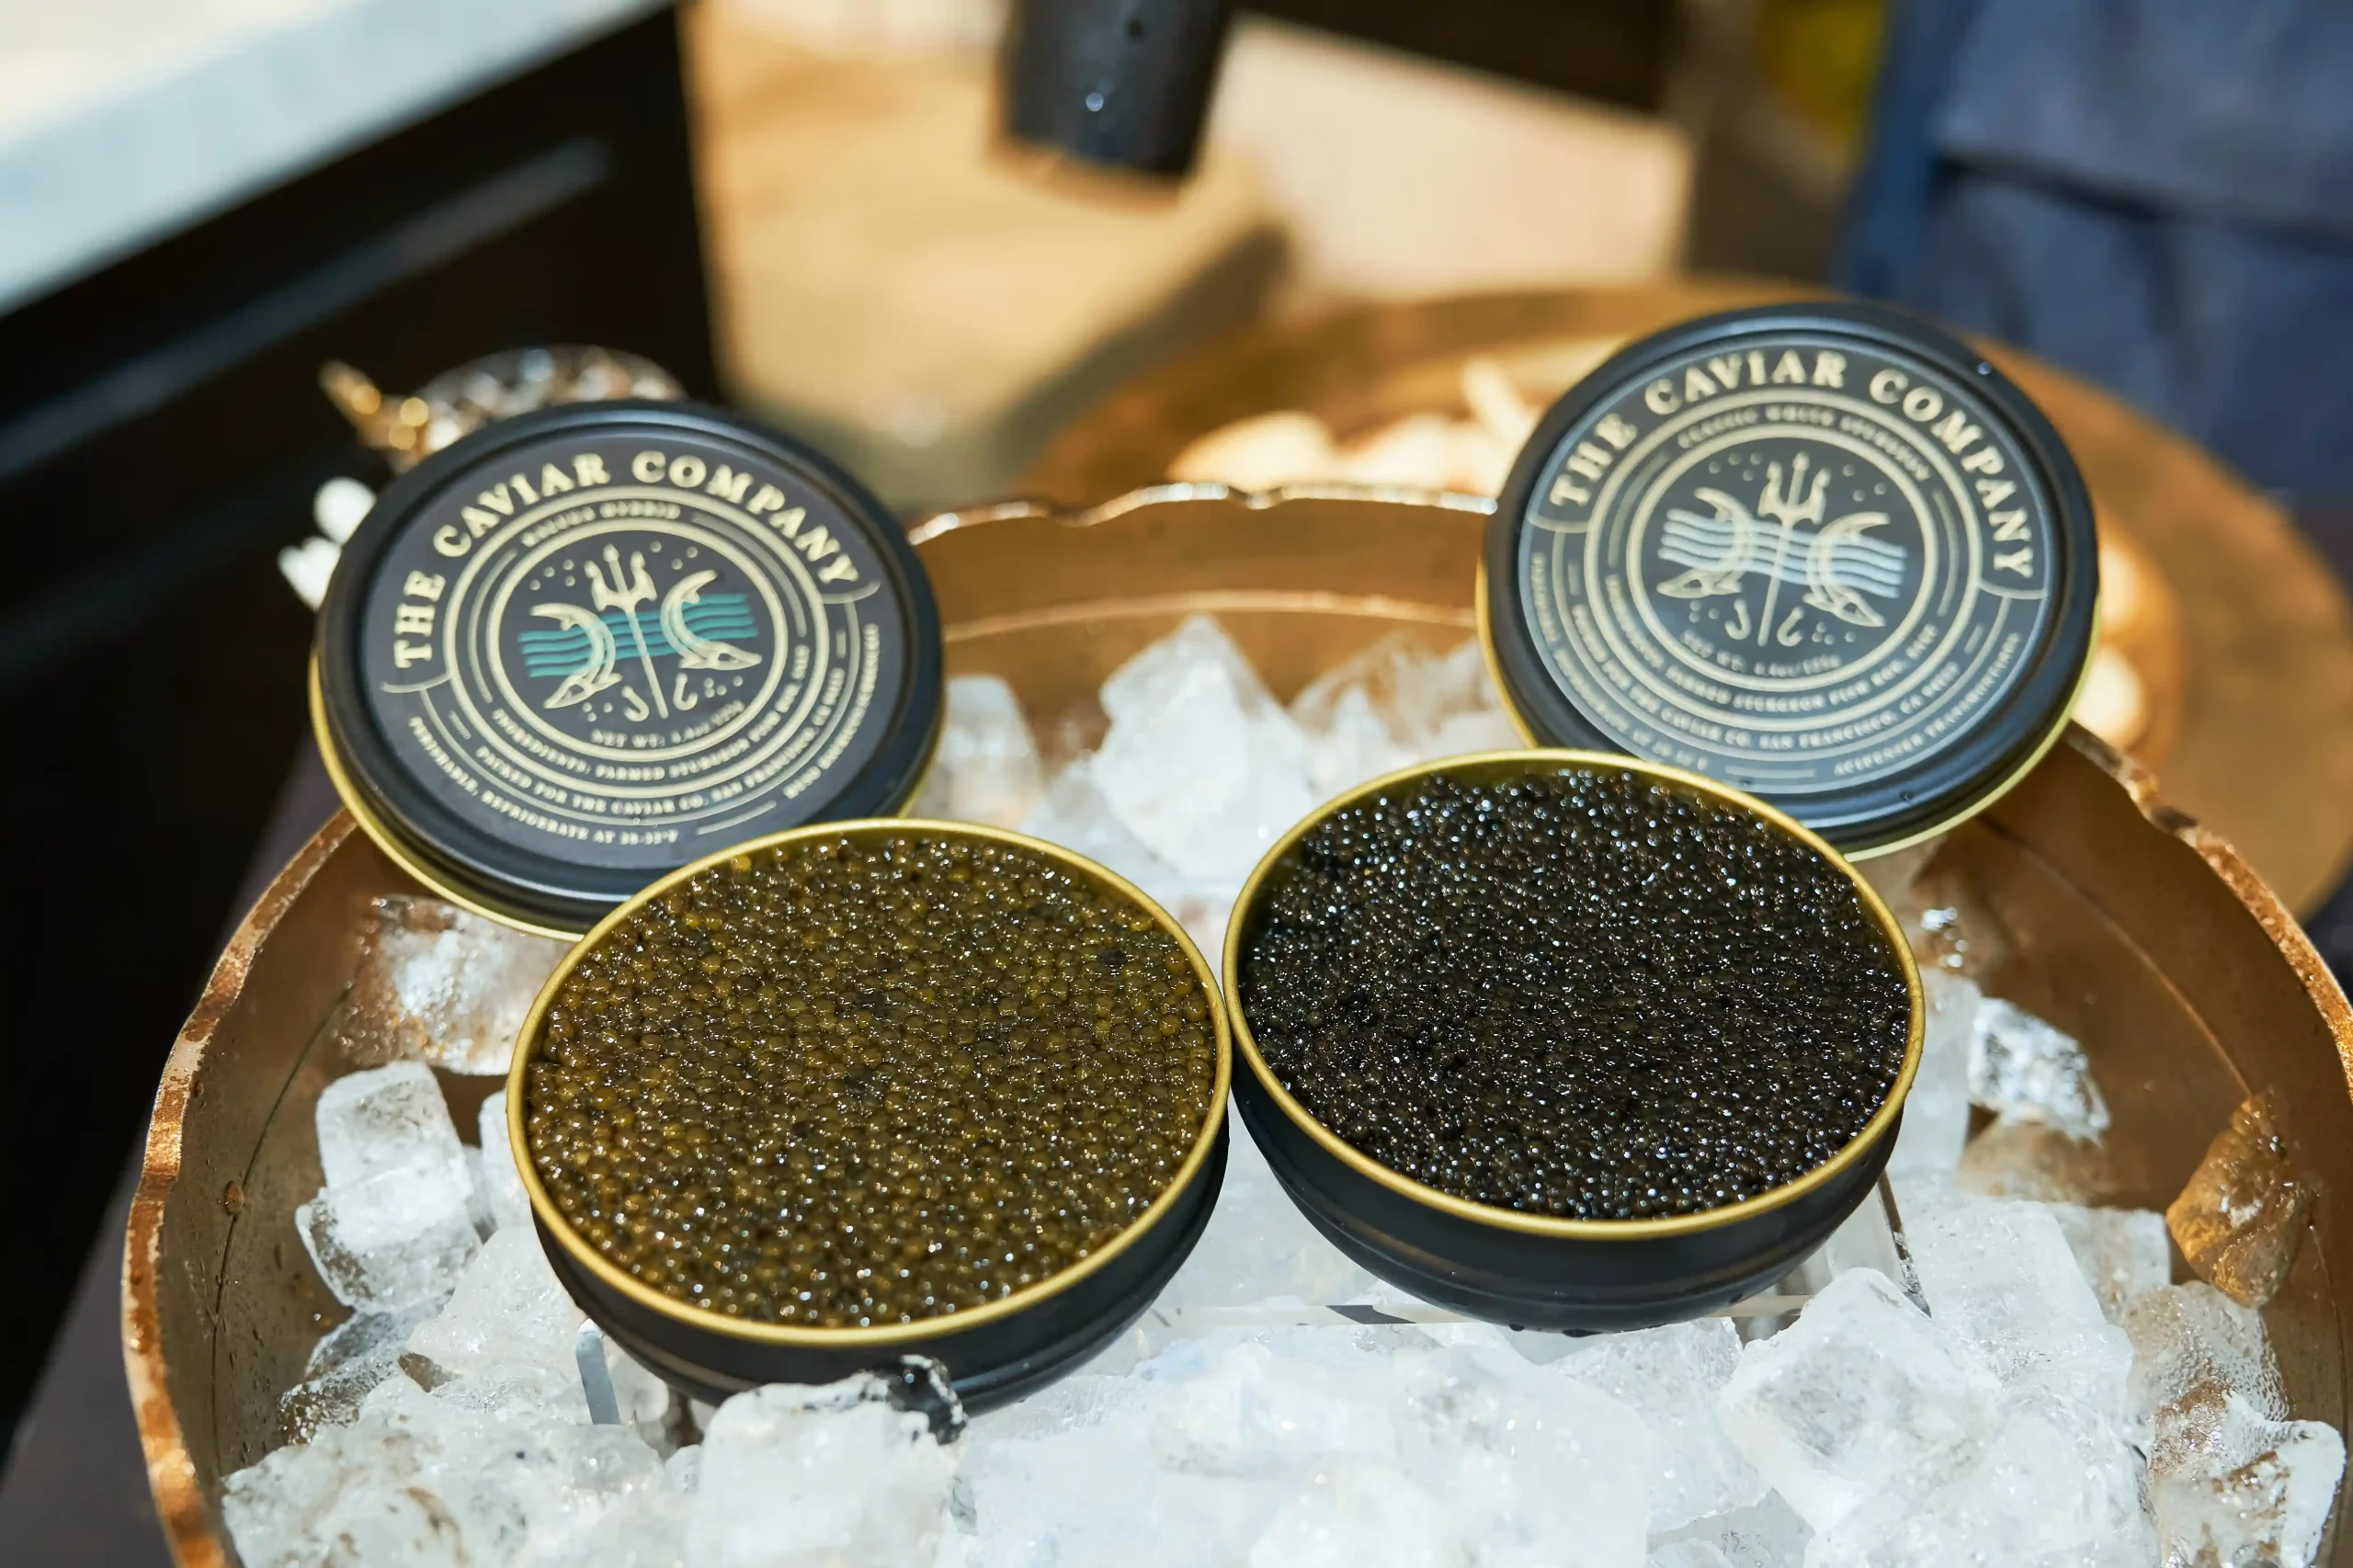 From Mythical Food to Realistic Indulgence: The Caviar Experience © Copyright PLPG GLOBAL MEDIA 2023